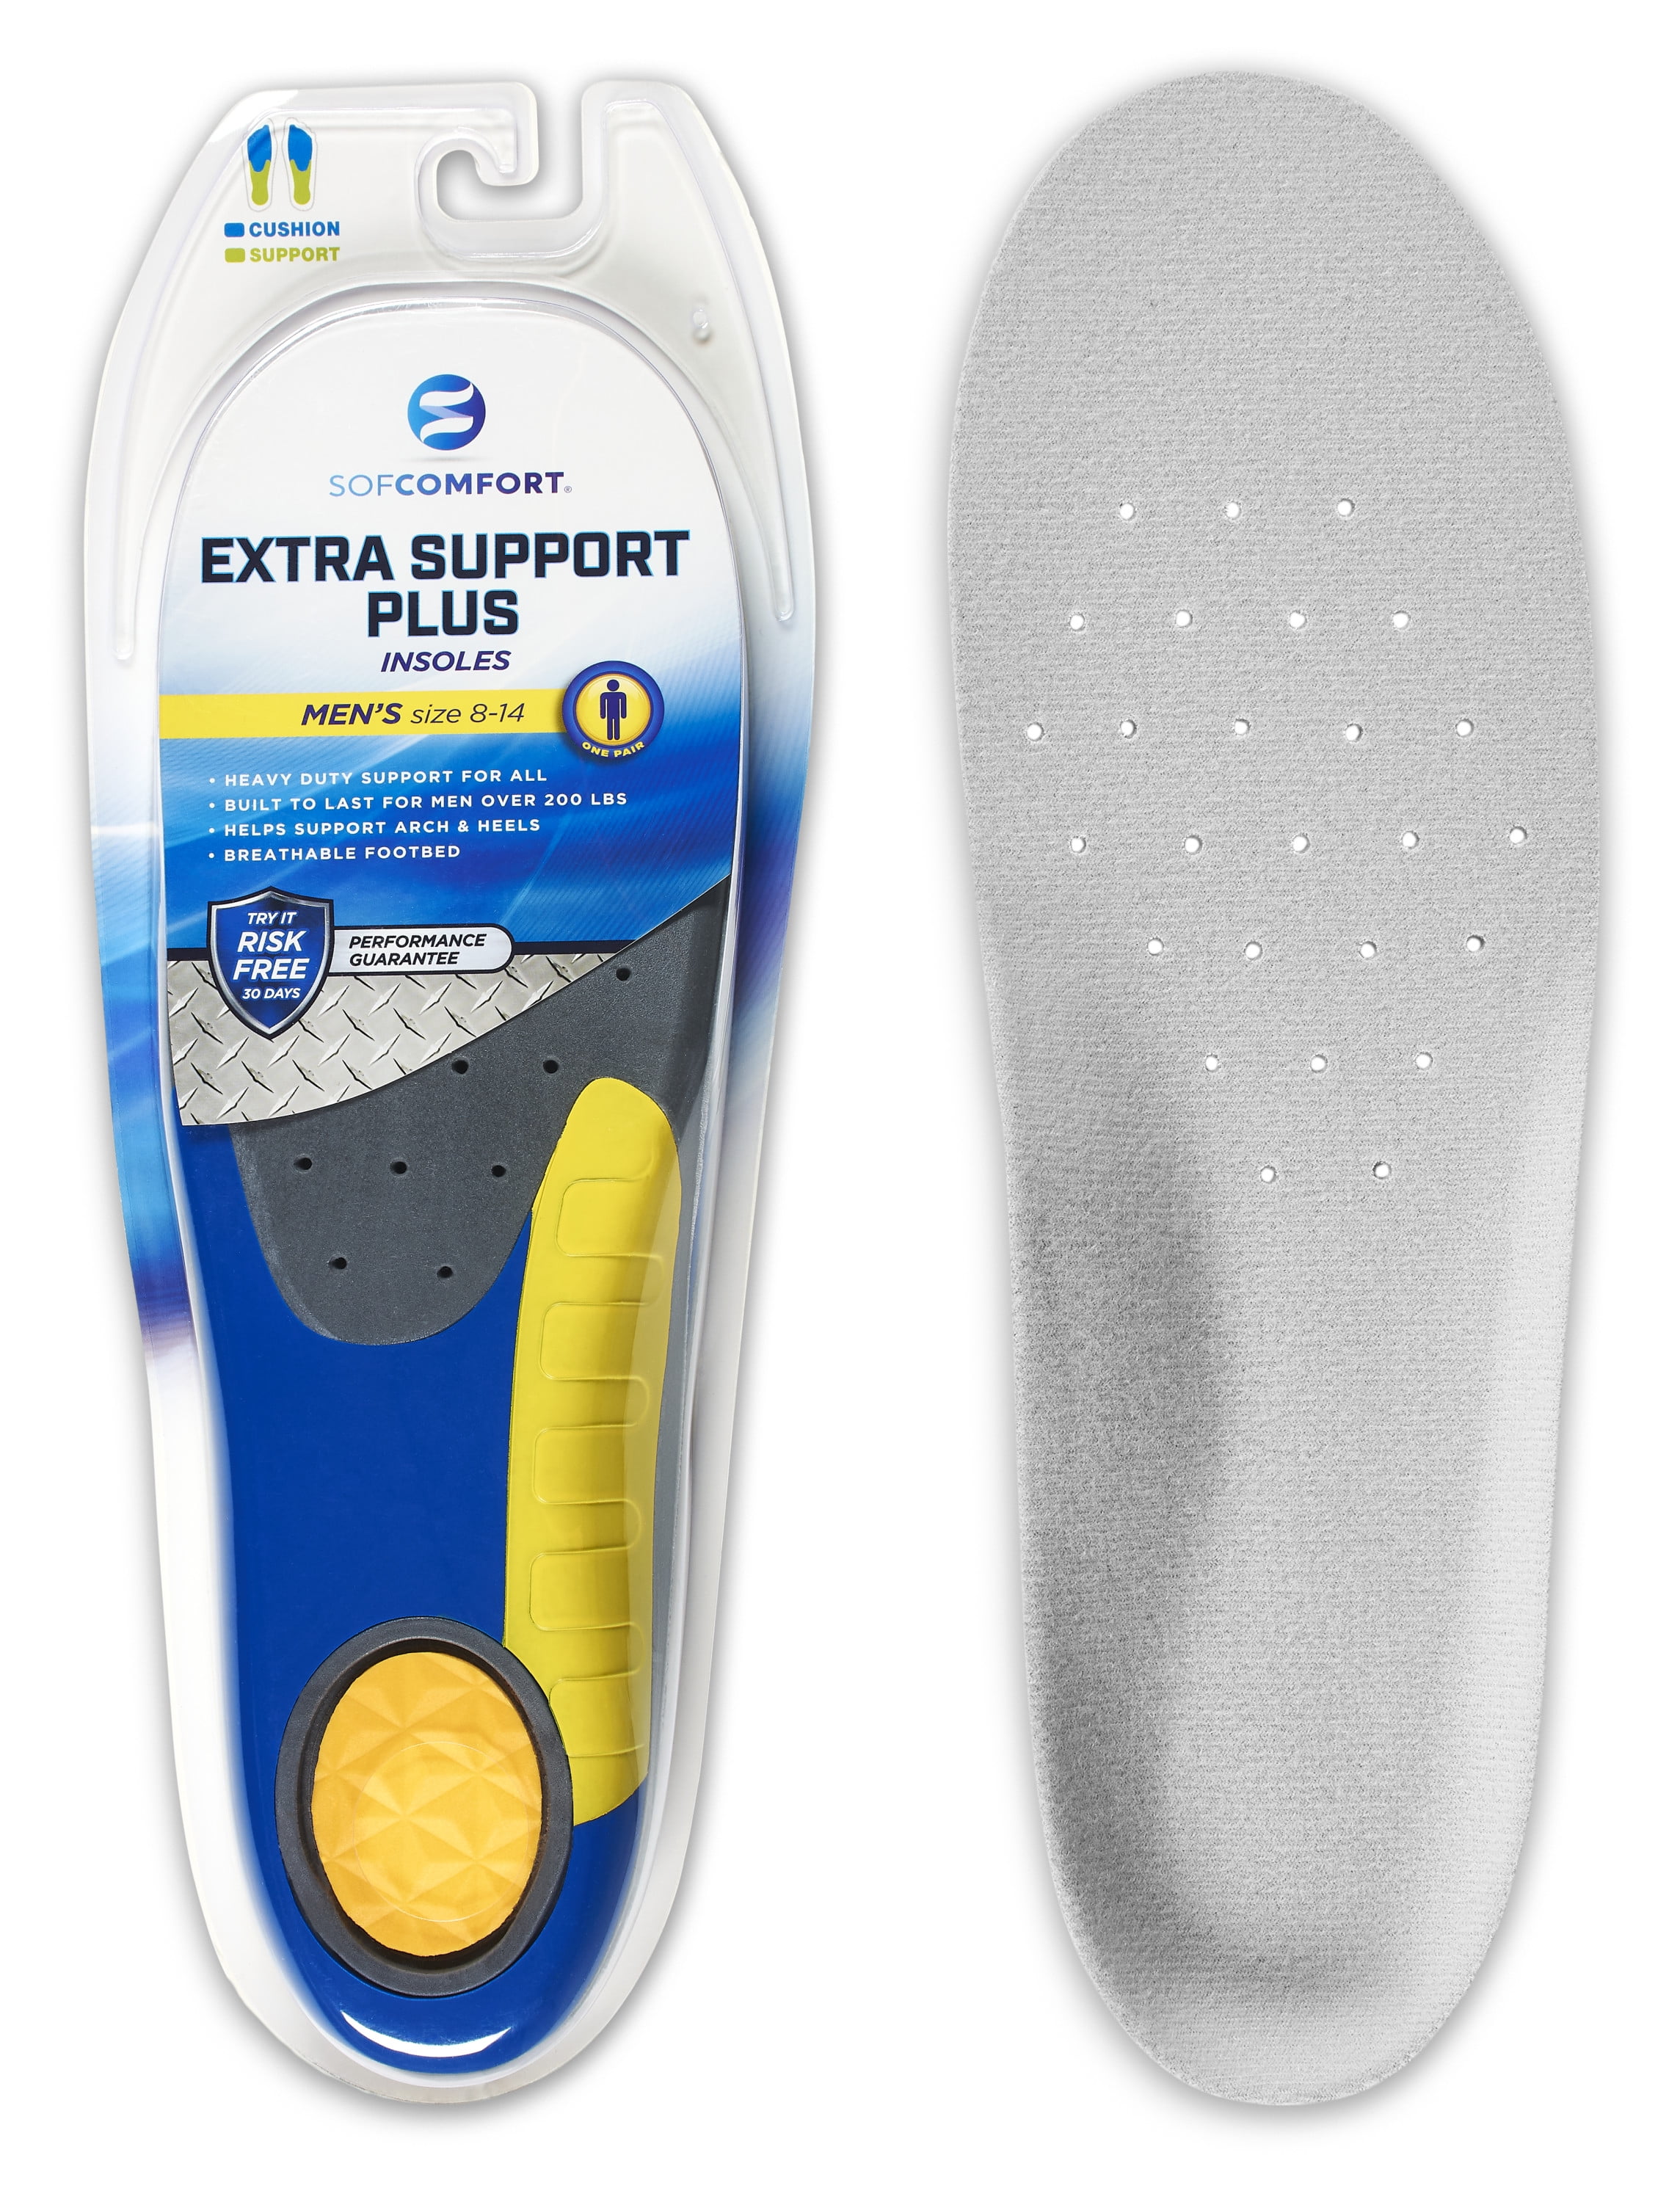 SofComfort Extra Support Plus Men's Insole Fits Size 8-14